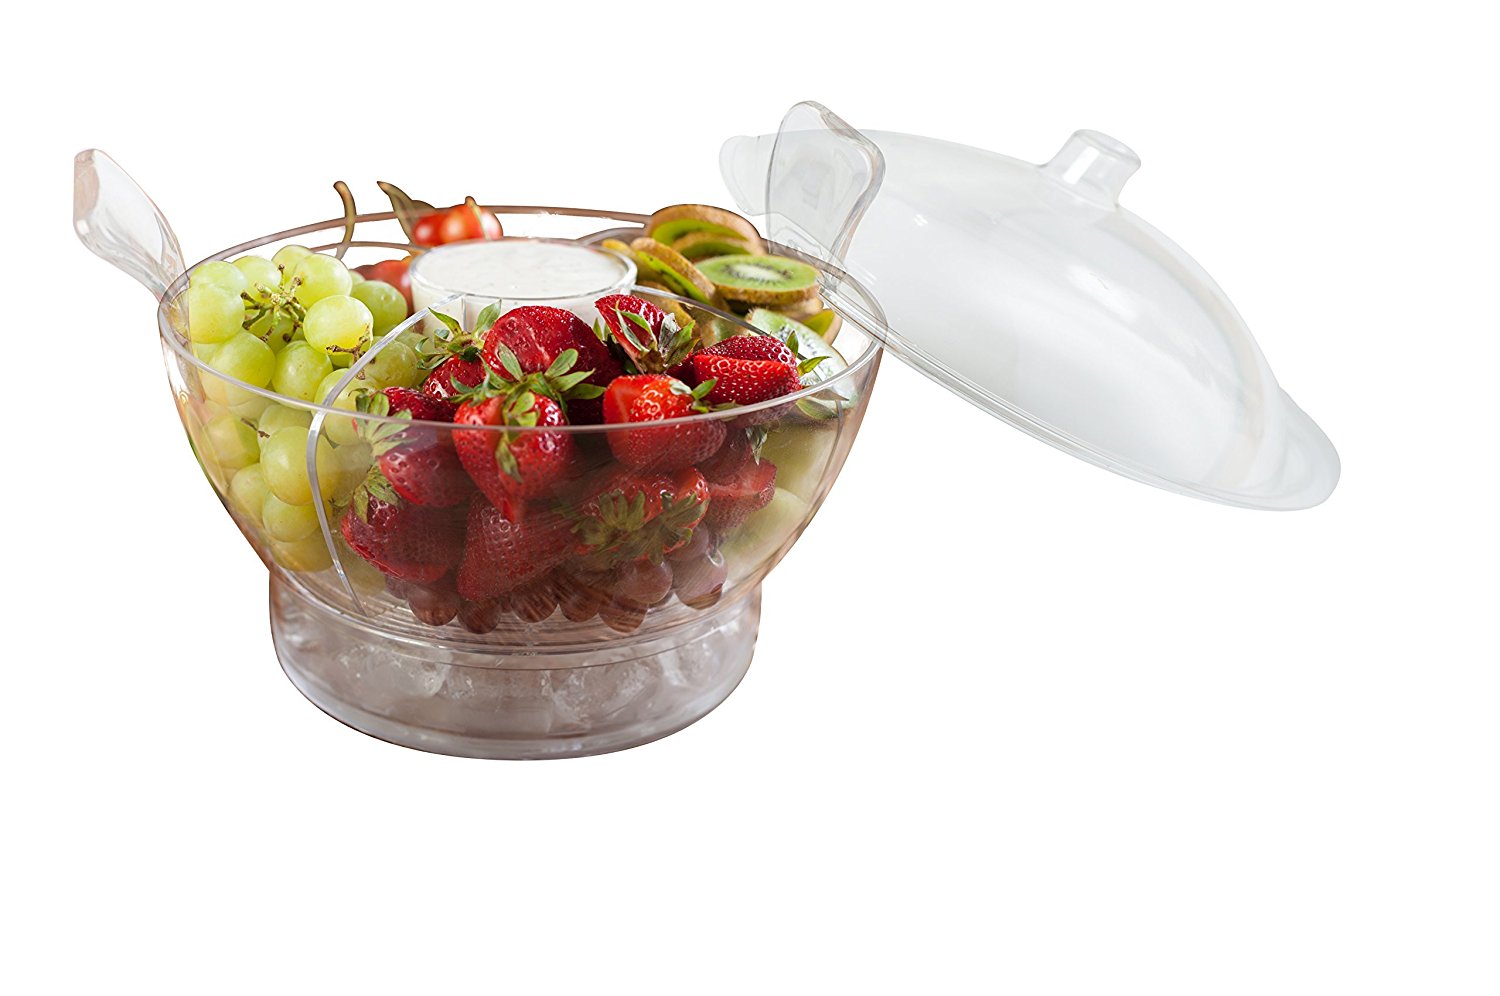 Chilled salad bowl on ice with spoon and fork 